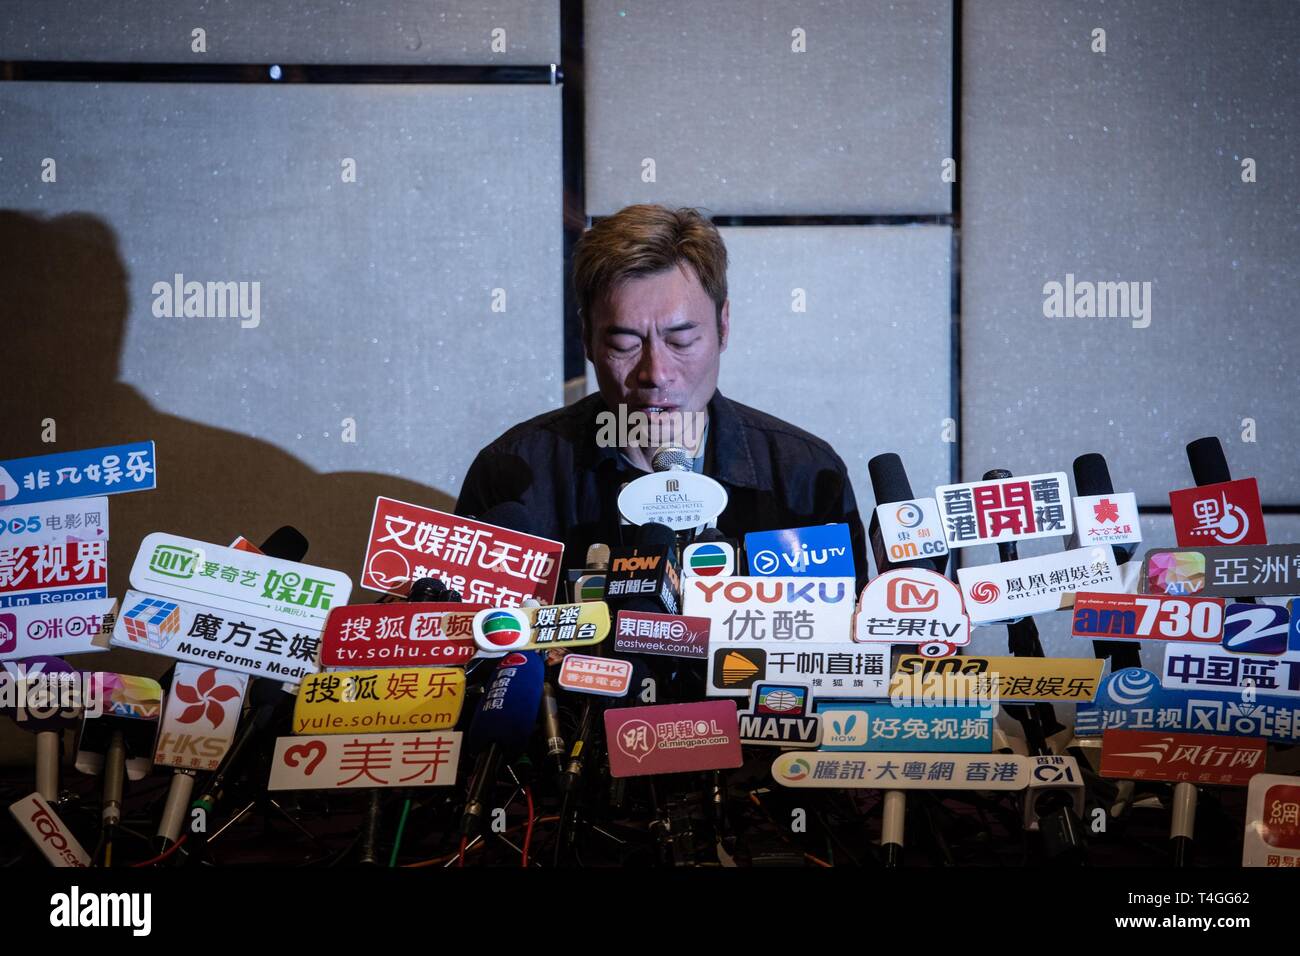 Hong Kong pop star Andy Hui Chi-on (51) seen speaking at a press conference addressing a scandal between him and the local actress Jacqueline Wong Sum-wing (30). Earlier today, local news outlet released a dashcam video showing Hui cheating on his wife Sammi Cheng Sau-man with Wong, while on a taxi ride home. Stock Photo